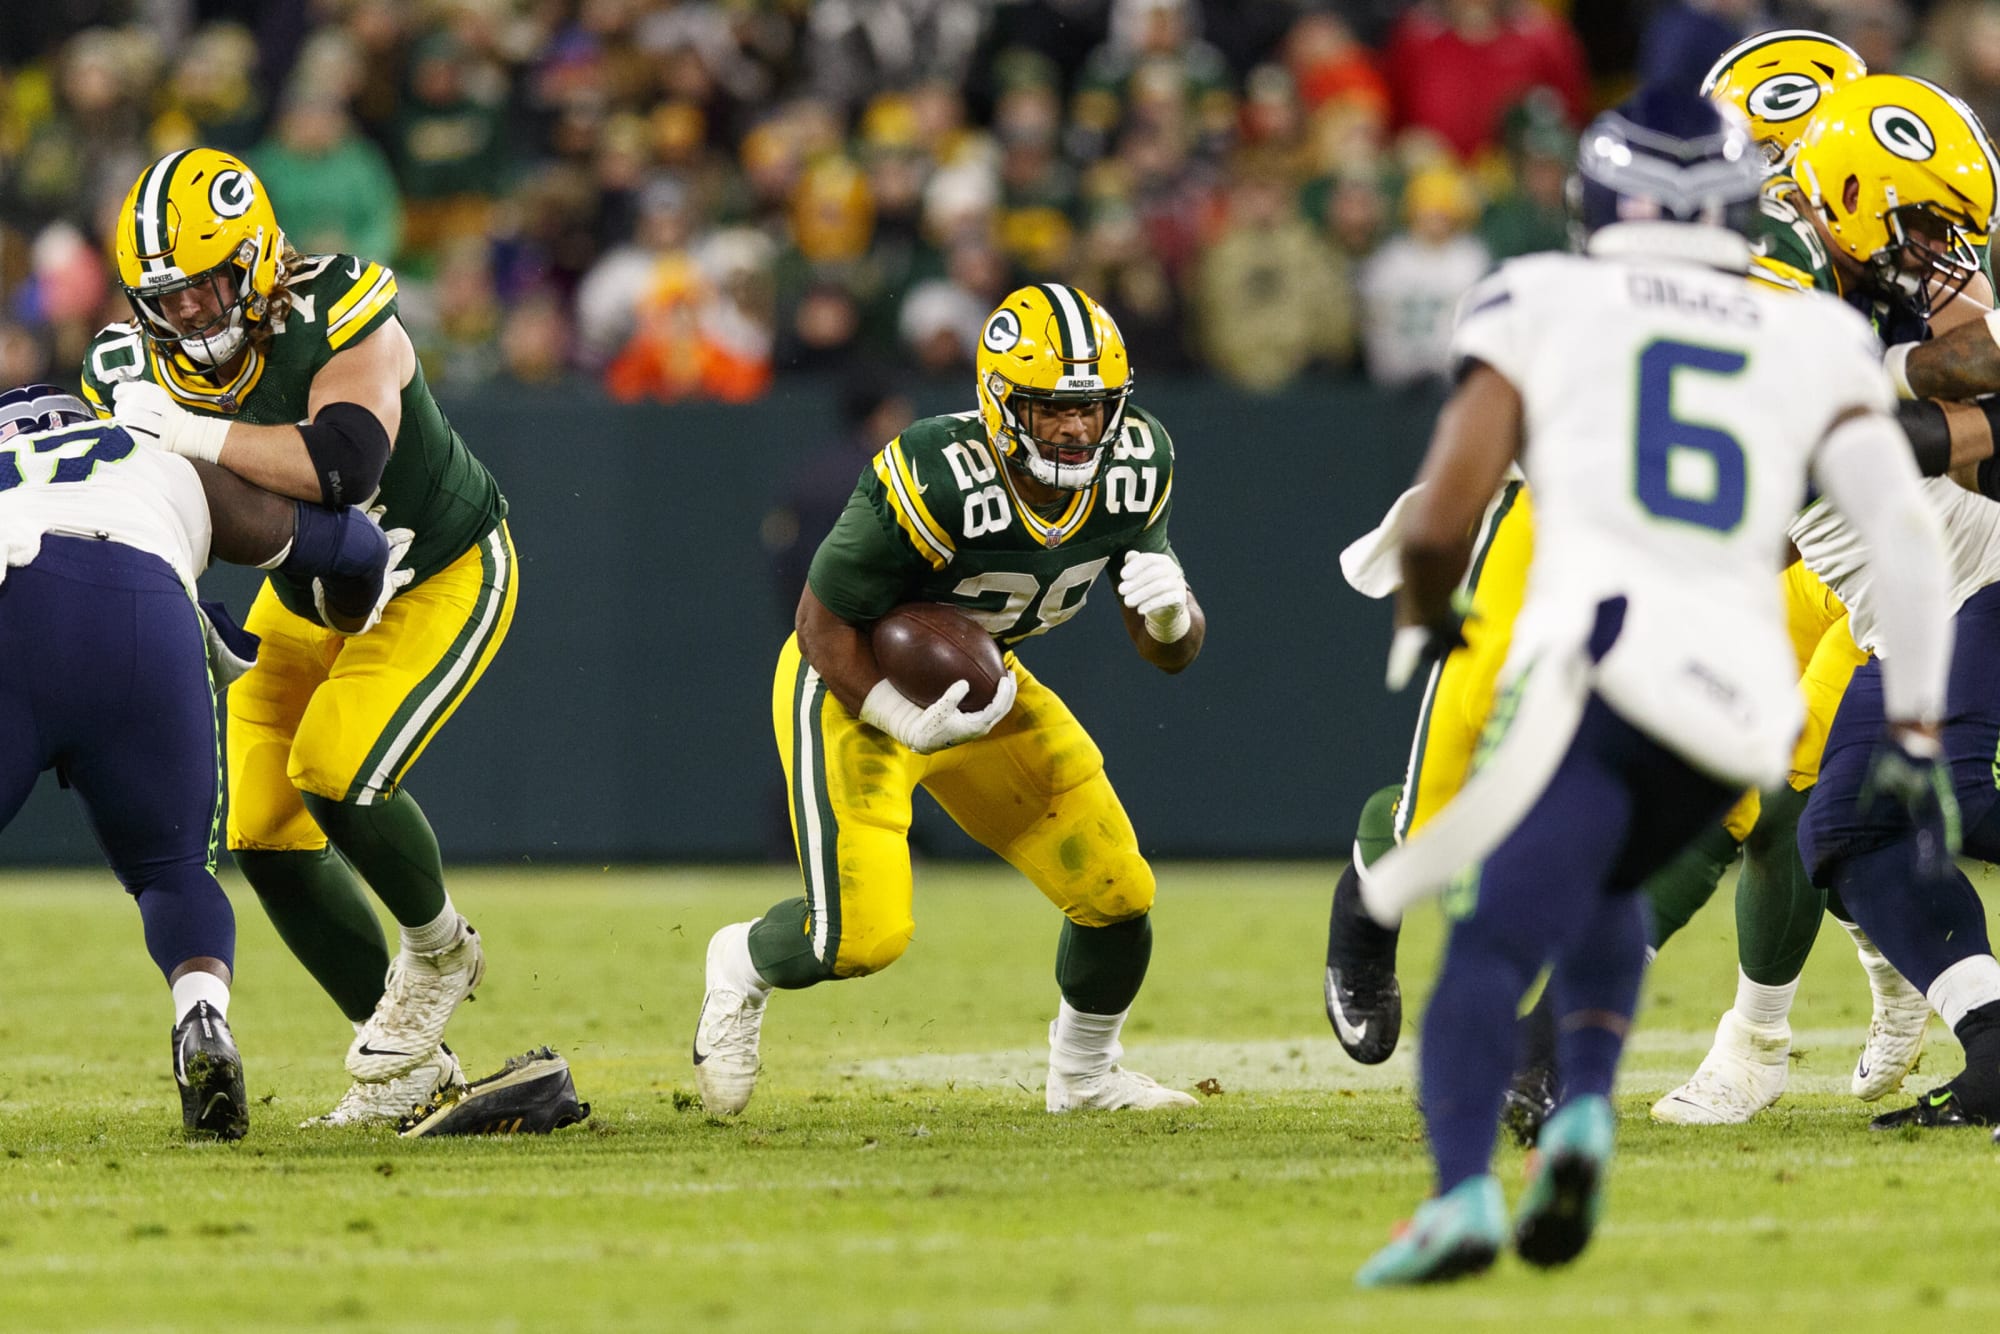 Green Bay Packers v. Seahawks: 4 Big Things from Shutout Win